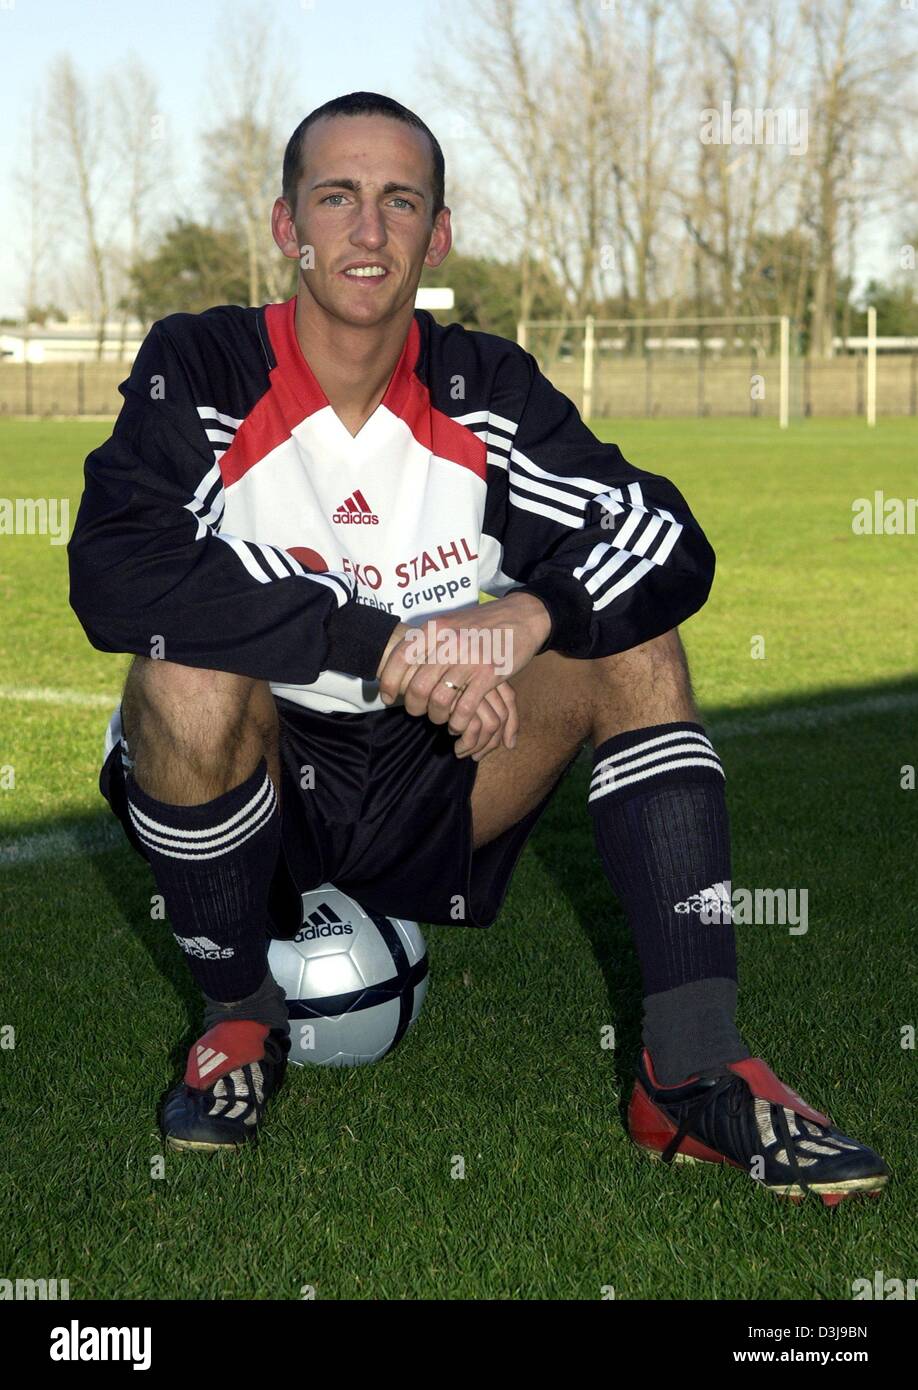 (dpa) - 23-year-old soccer player Normen Elsner during a training session in Eisenhuettenstadt, Germany, 14 April 2004. Forward Elsner became the centre of the news media after scoring a goal after only 3,52 seconds into a game in Germany's 4th division versus Victoria Frankfurt/Oder. Right after the kickoff Elsner lifted the ball into the goal to score one of the fastest goals eve Stock Photo